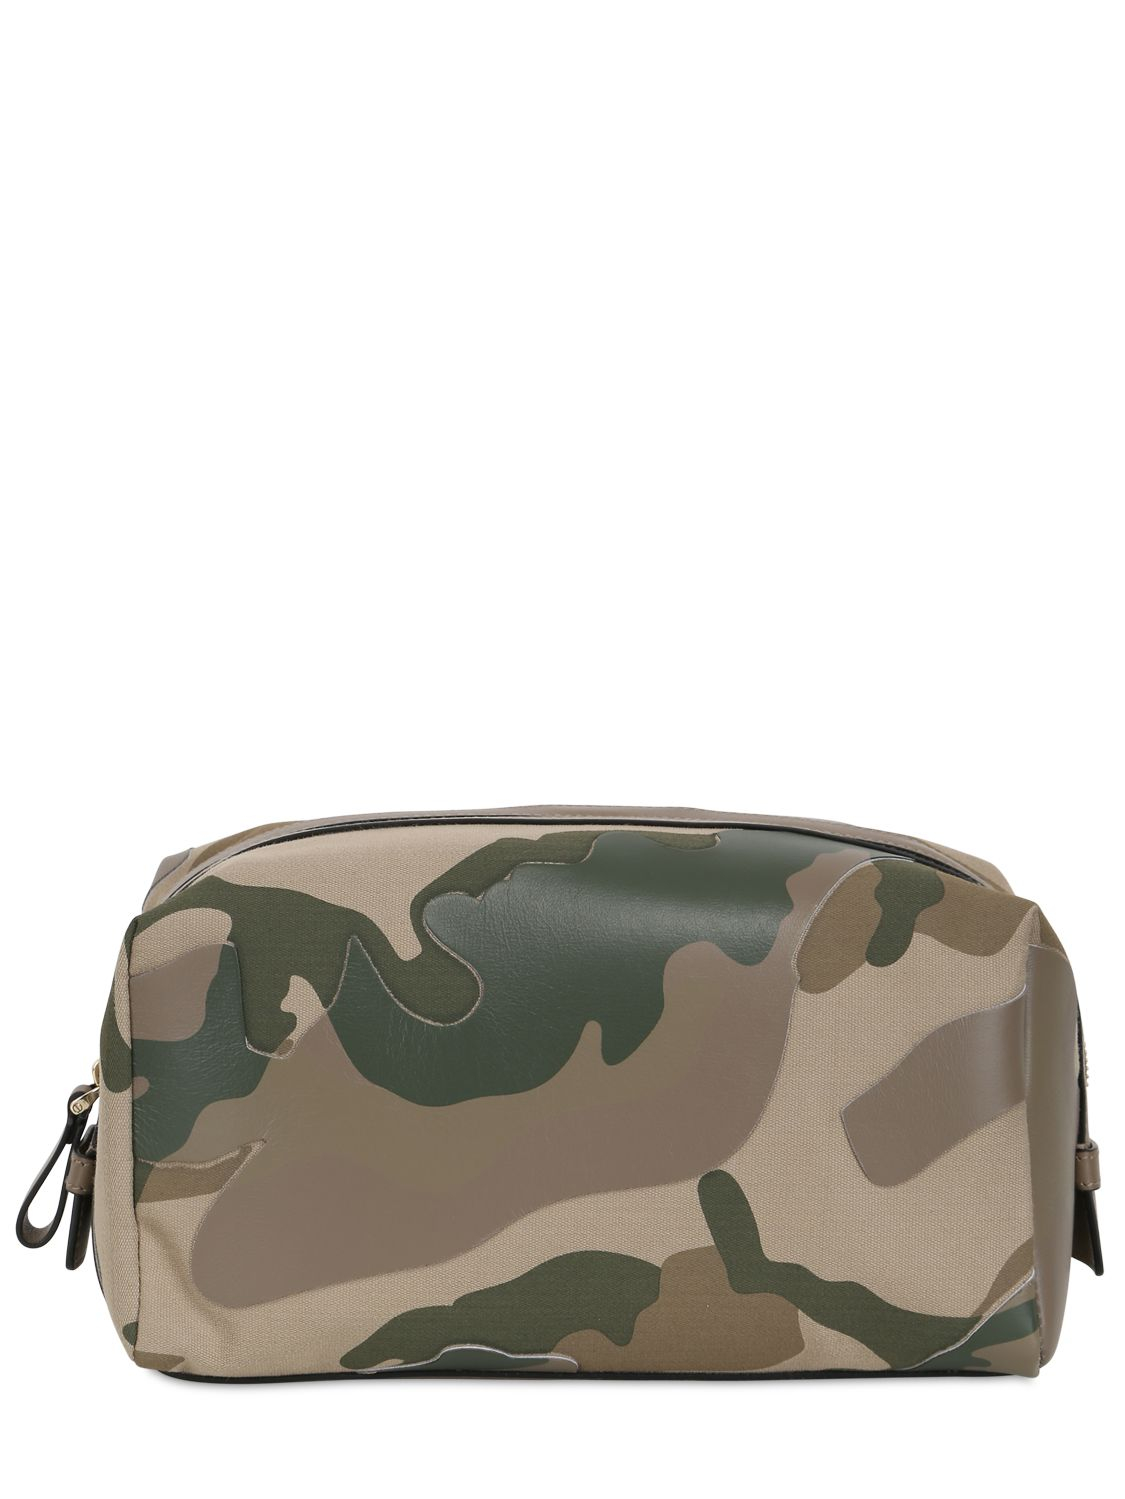 Lyst - Valentino Camouflage Nylon Leather Toiletry Bag in Green for Men